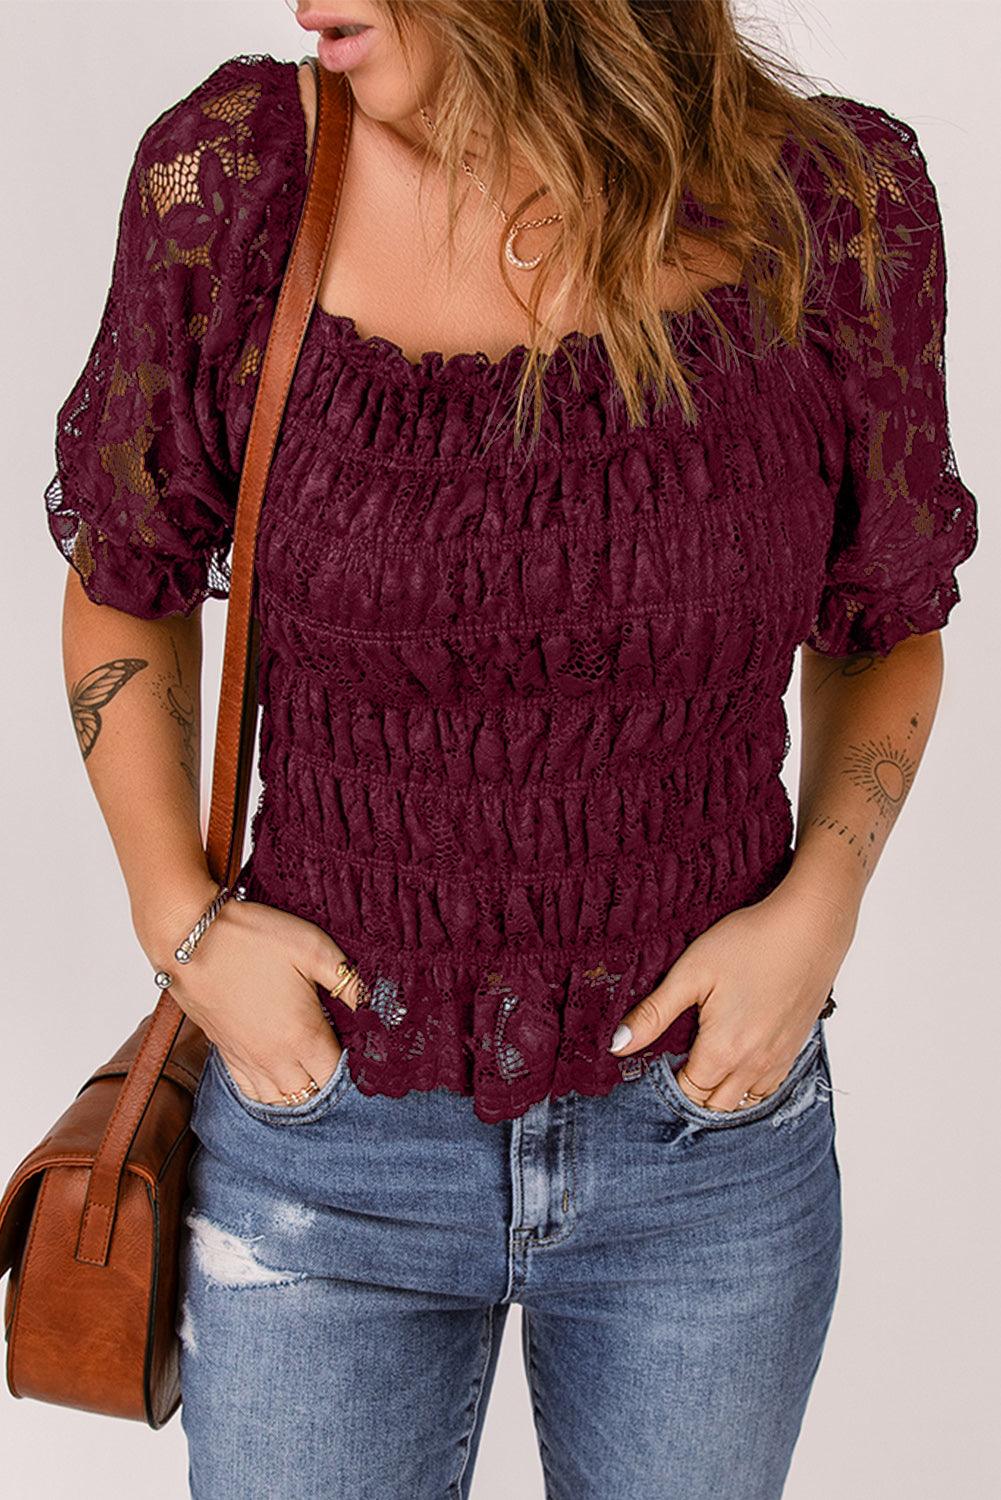 Floral Lace Crochet Ruffled Shirred Square Neck Top - L & M Kee, LLC